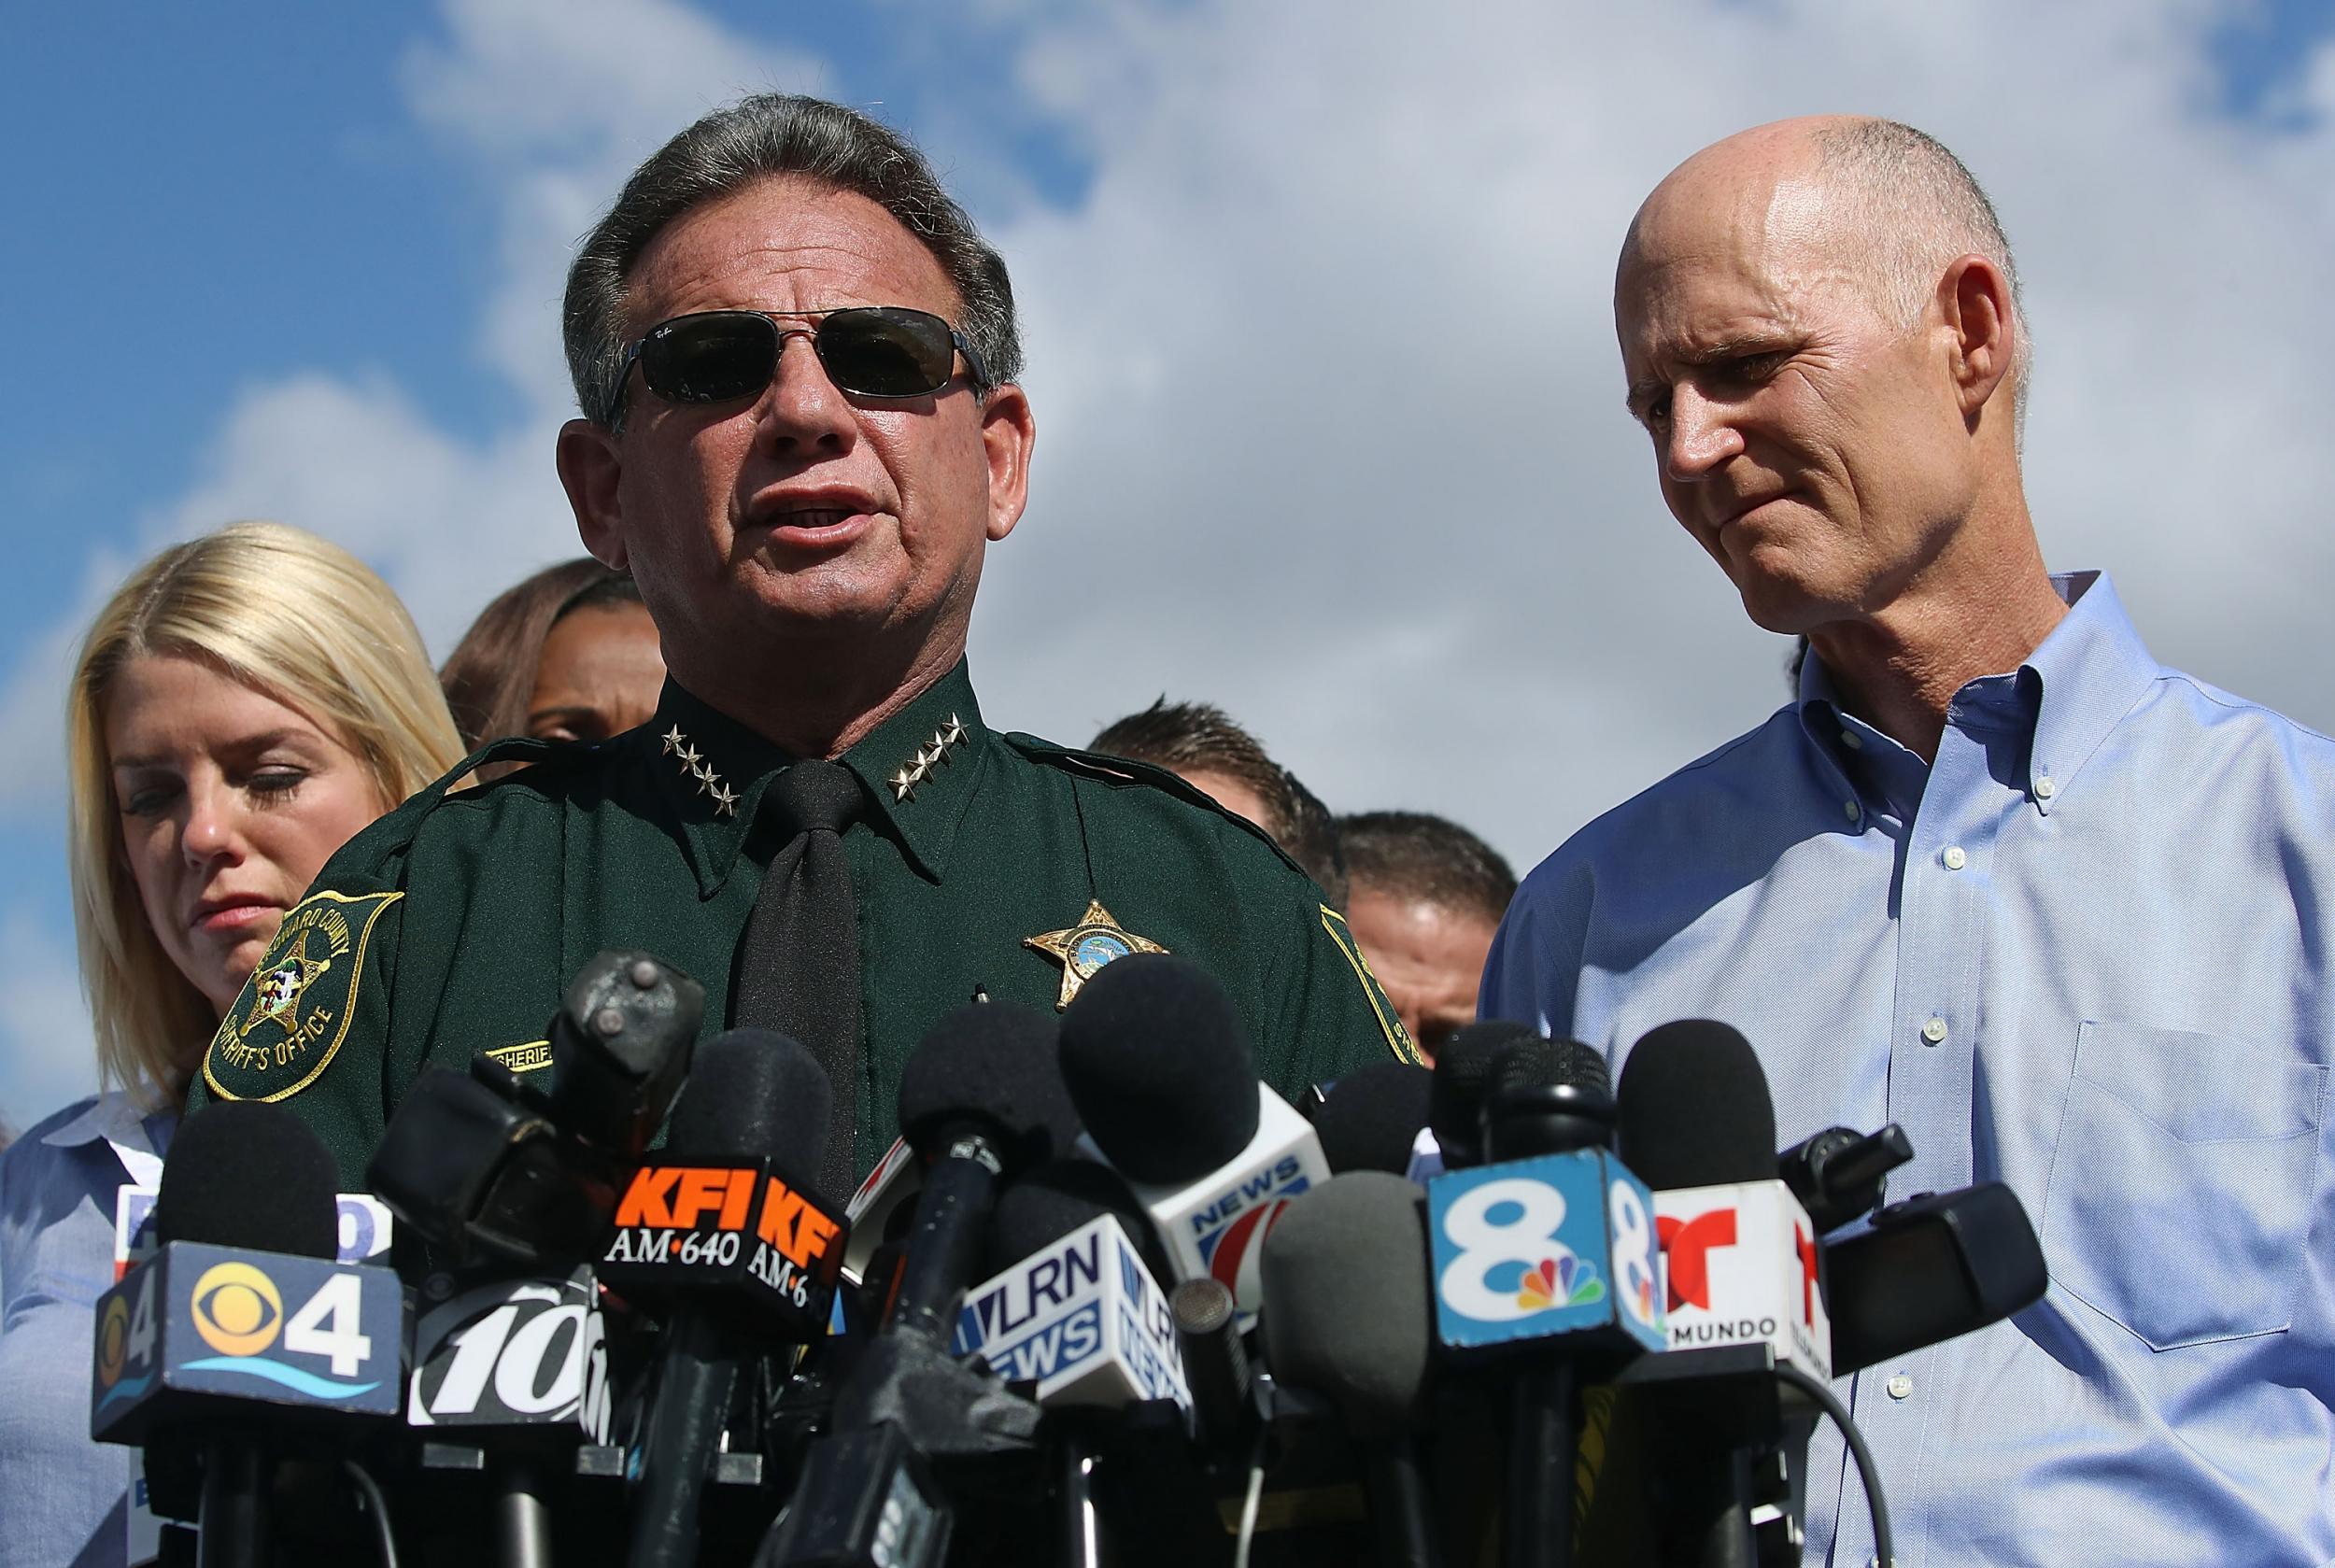 Broward County Sheriff, Scott Israel speaks to the media about the mass shooting at Marjory Stoneman Douglas High School